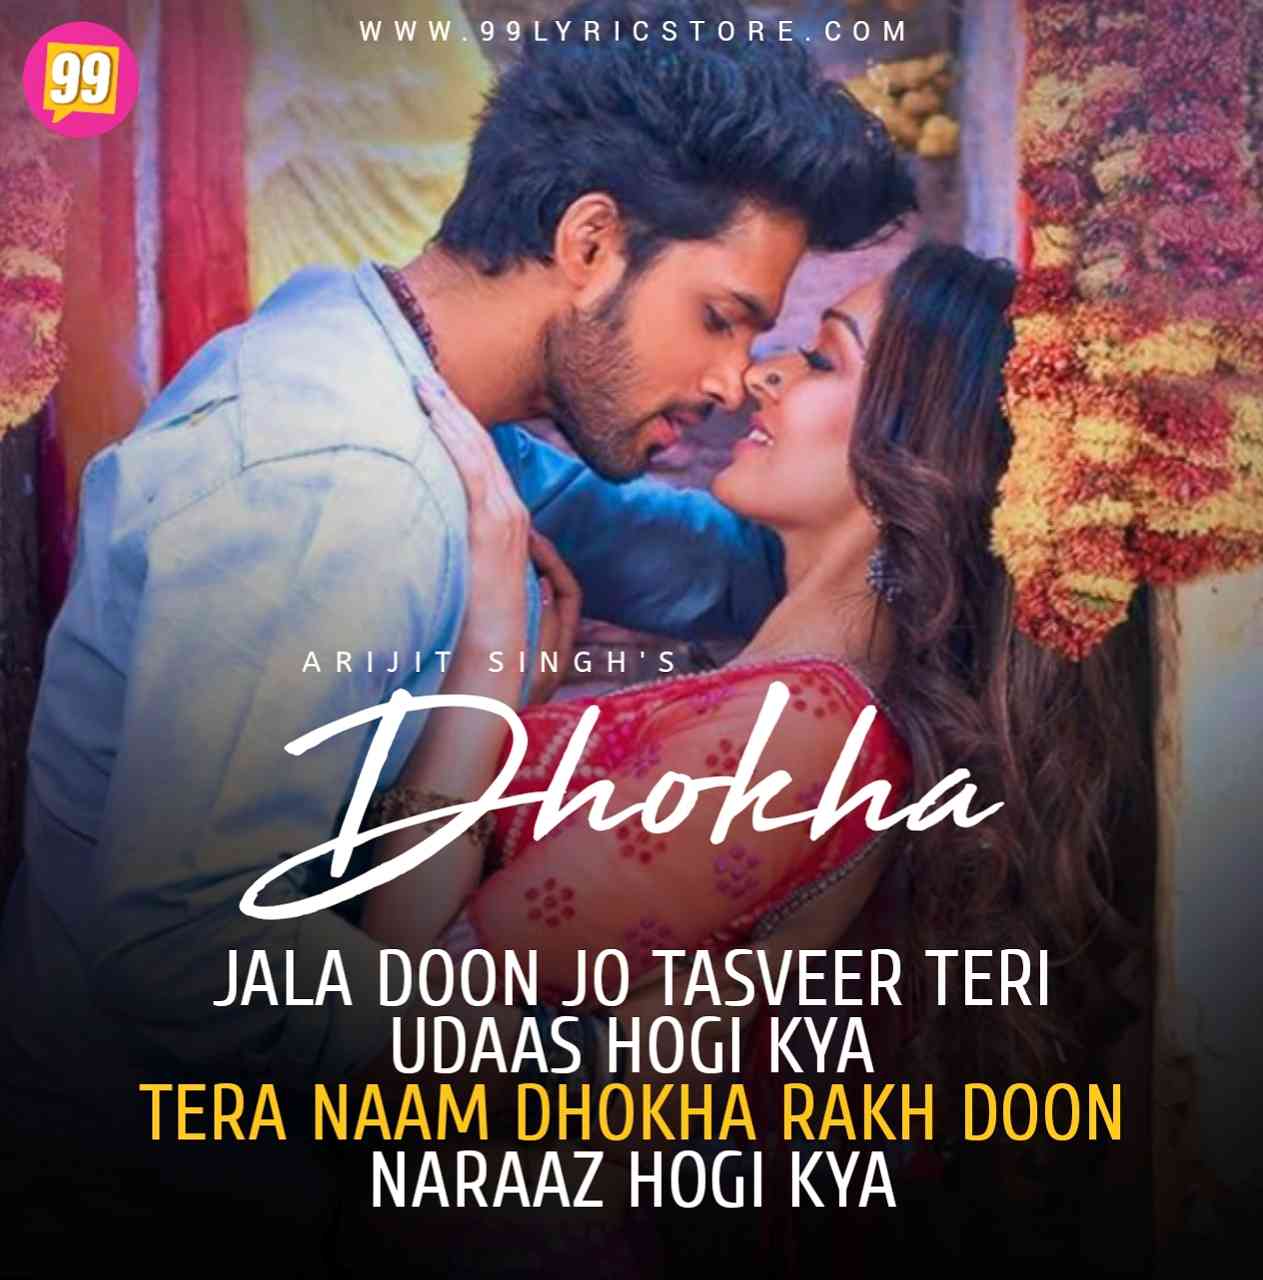 Dhokha Song Image Features Khushali Kumar & Parth Samthaan Sung By Arijit Singh